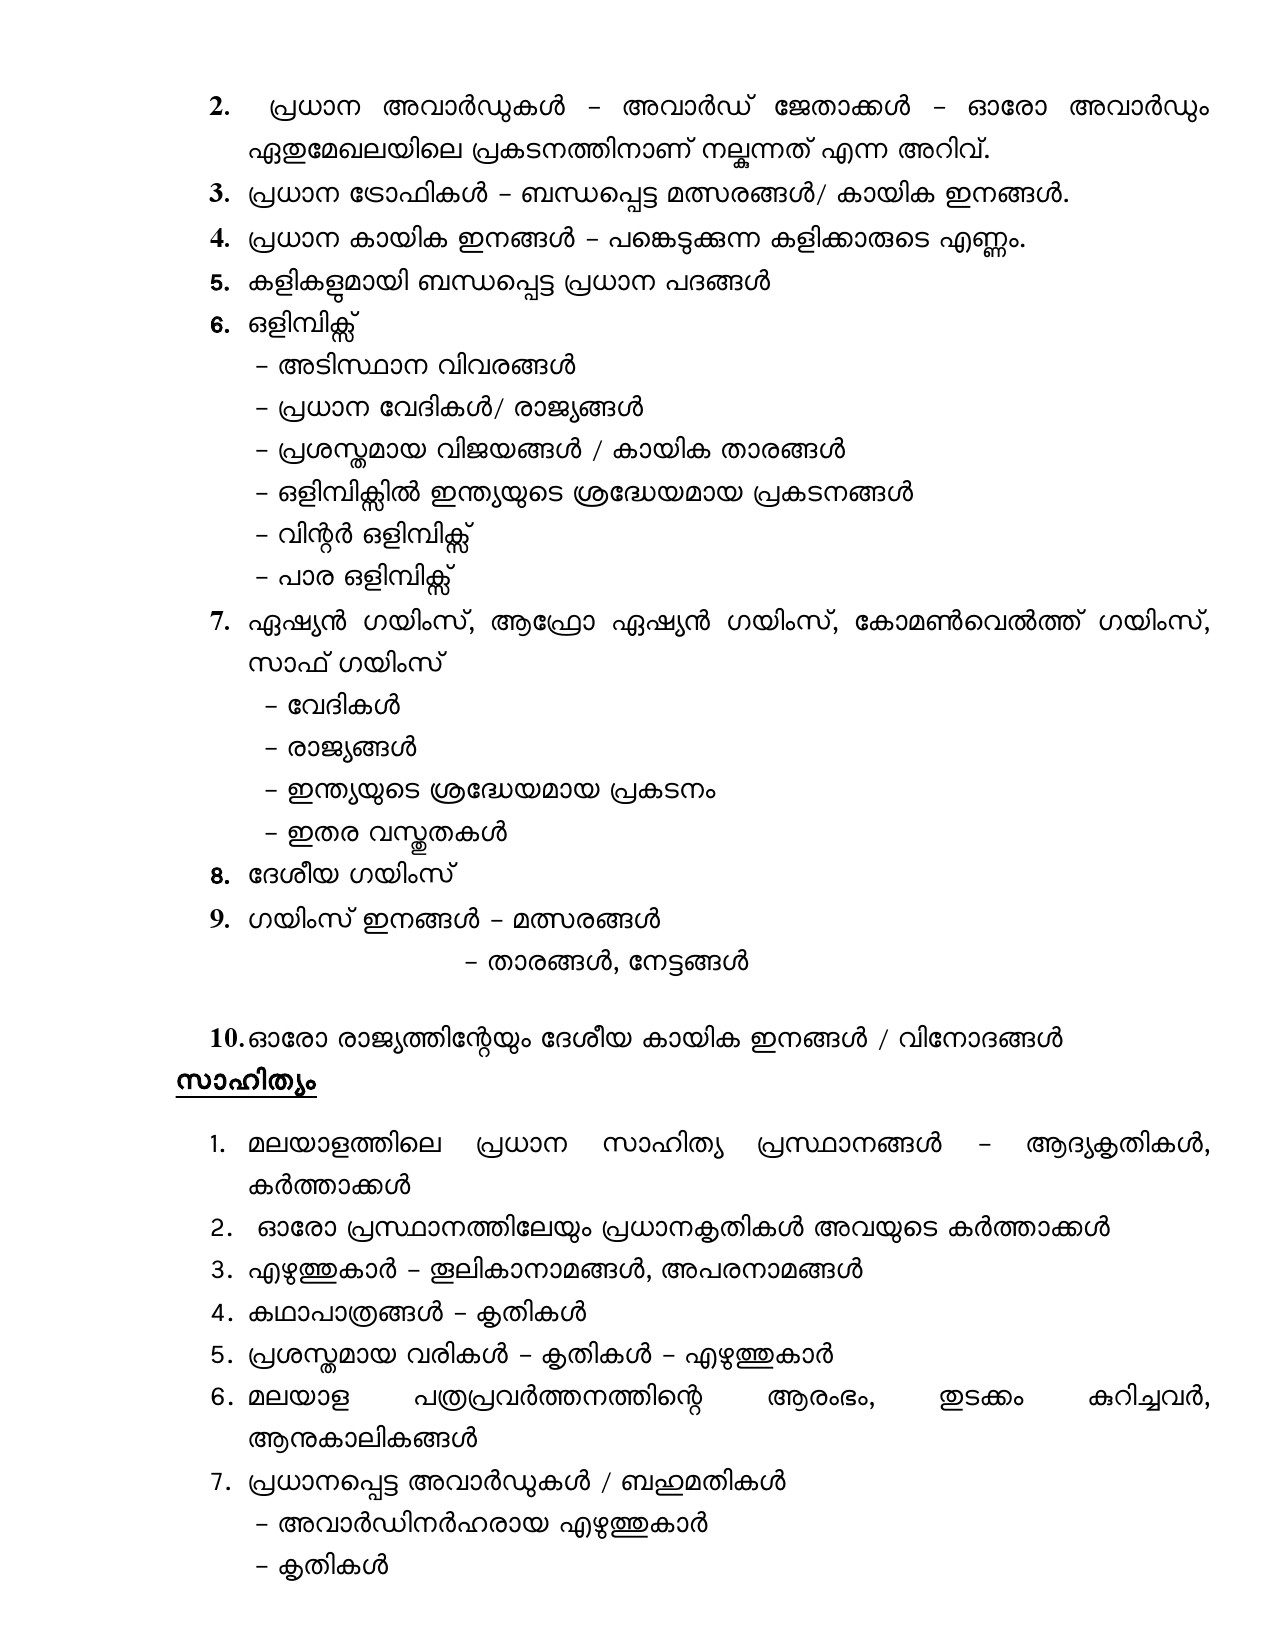 Syllabus For 2023 OMR Examination Of Civil Police Officer - Notification Image 6